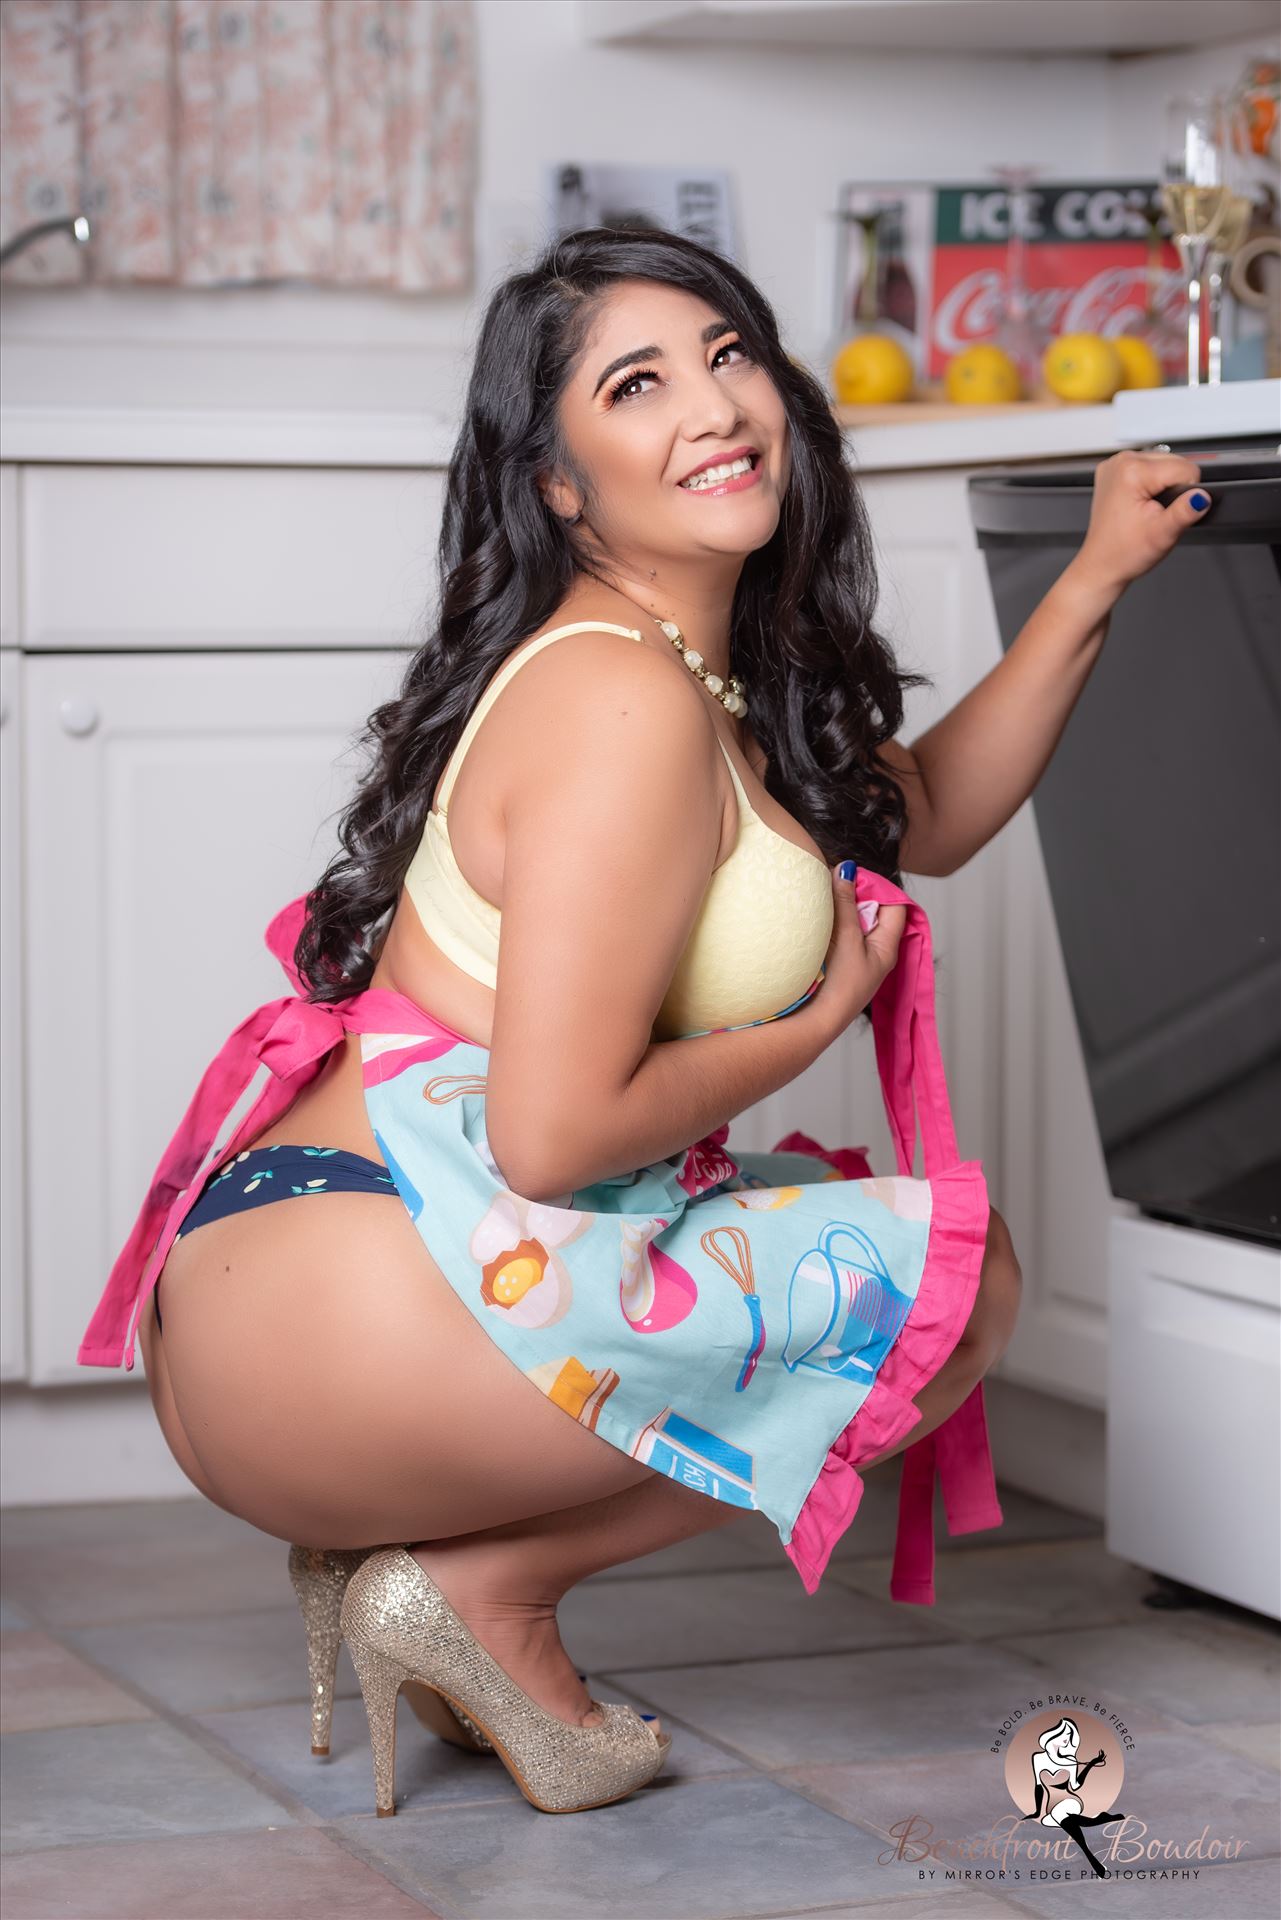 Port-8196.JPGBeachfront Boudoir by Mirror's Edge Photography is a Boutique Luxury Boudoir Photography Studio located just blocks from the beach in Oceano, California. My mission is to show as many women as possible how beautiful they truly are! Pin Up kitchen.